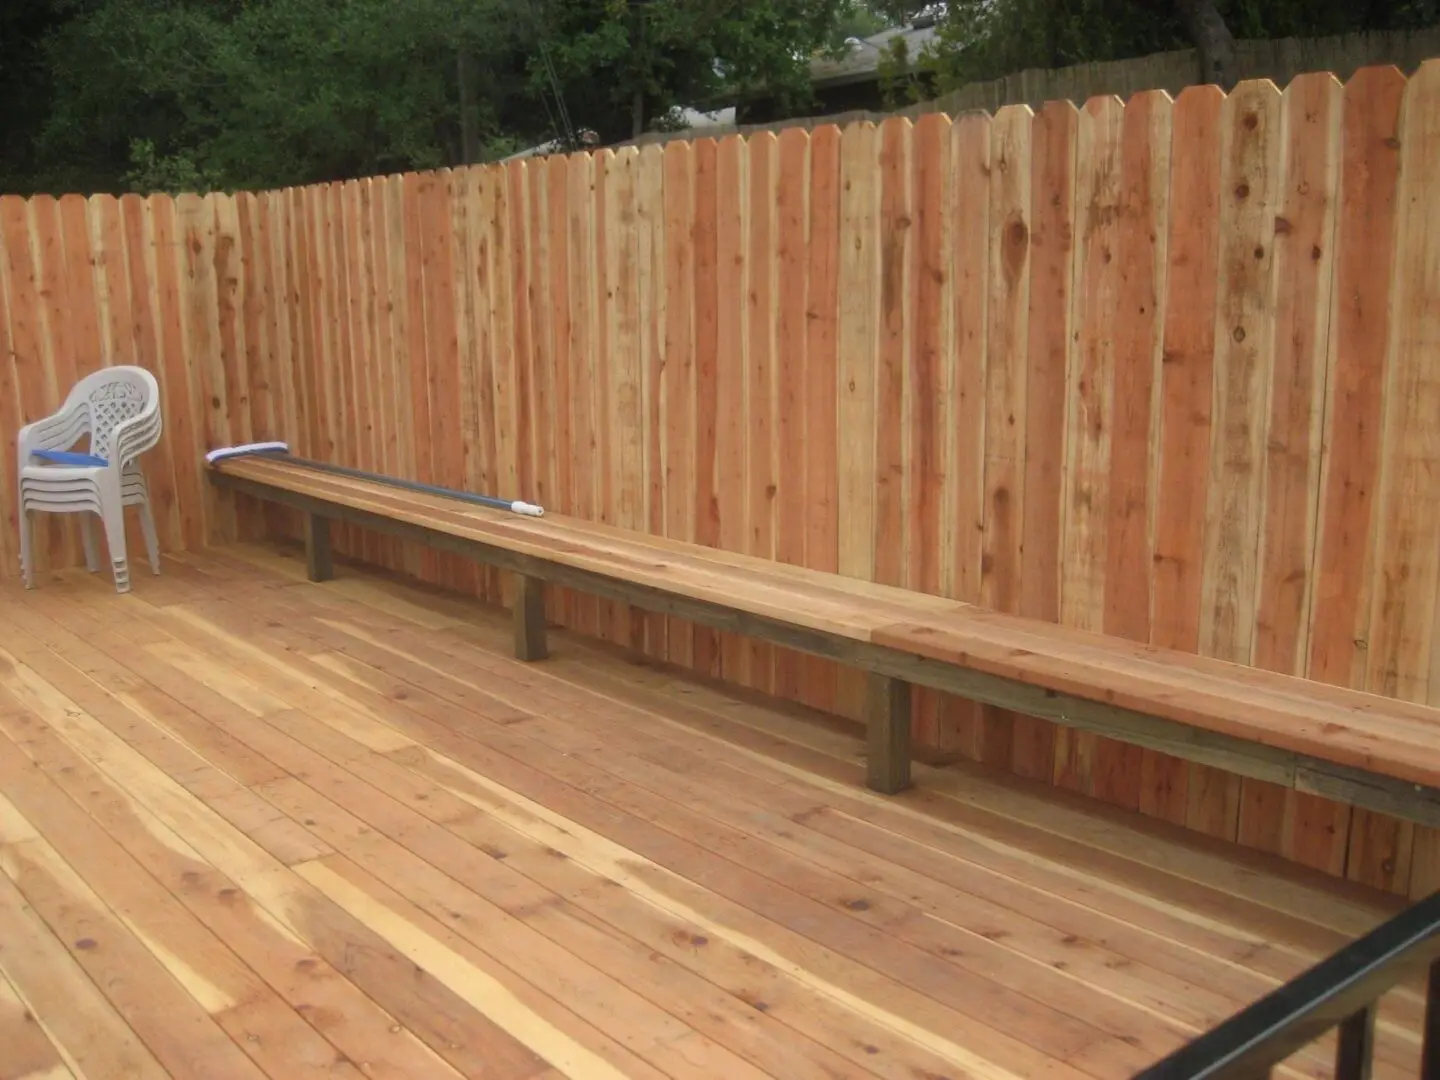 A wooden fence with benches on top of it.